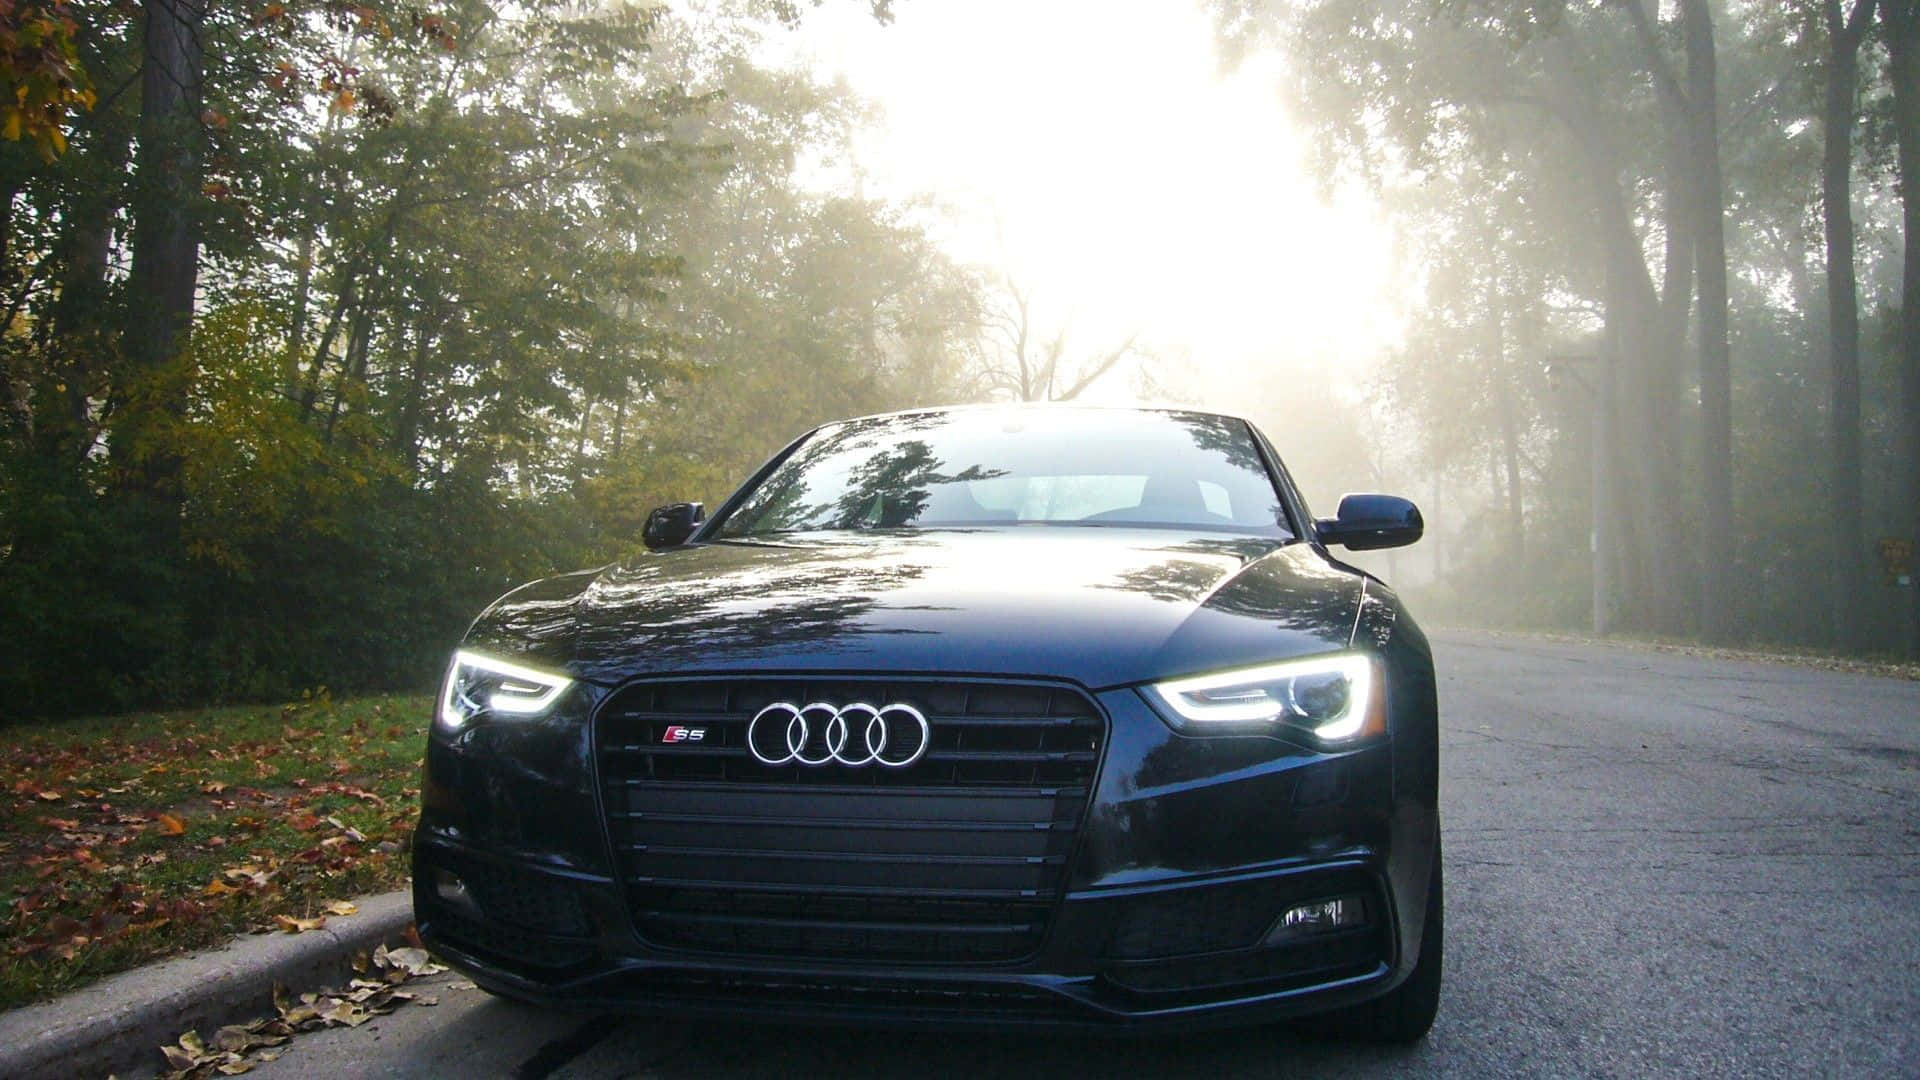 Stunning Audi S6 in motion on a scenic road Wallpaper